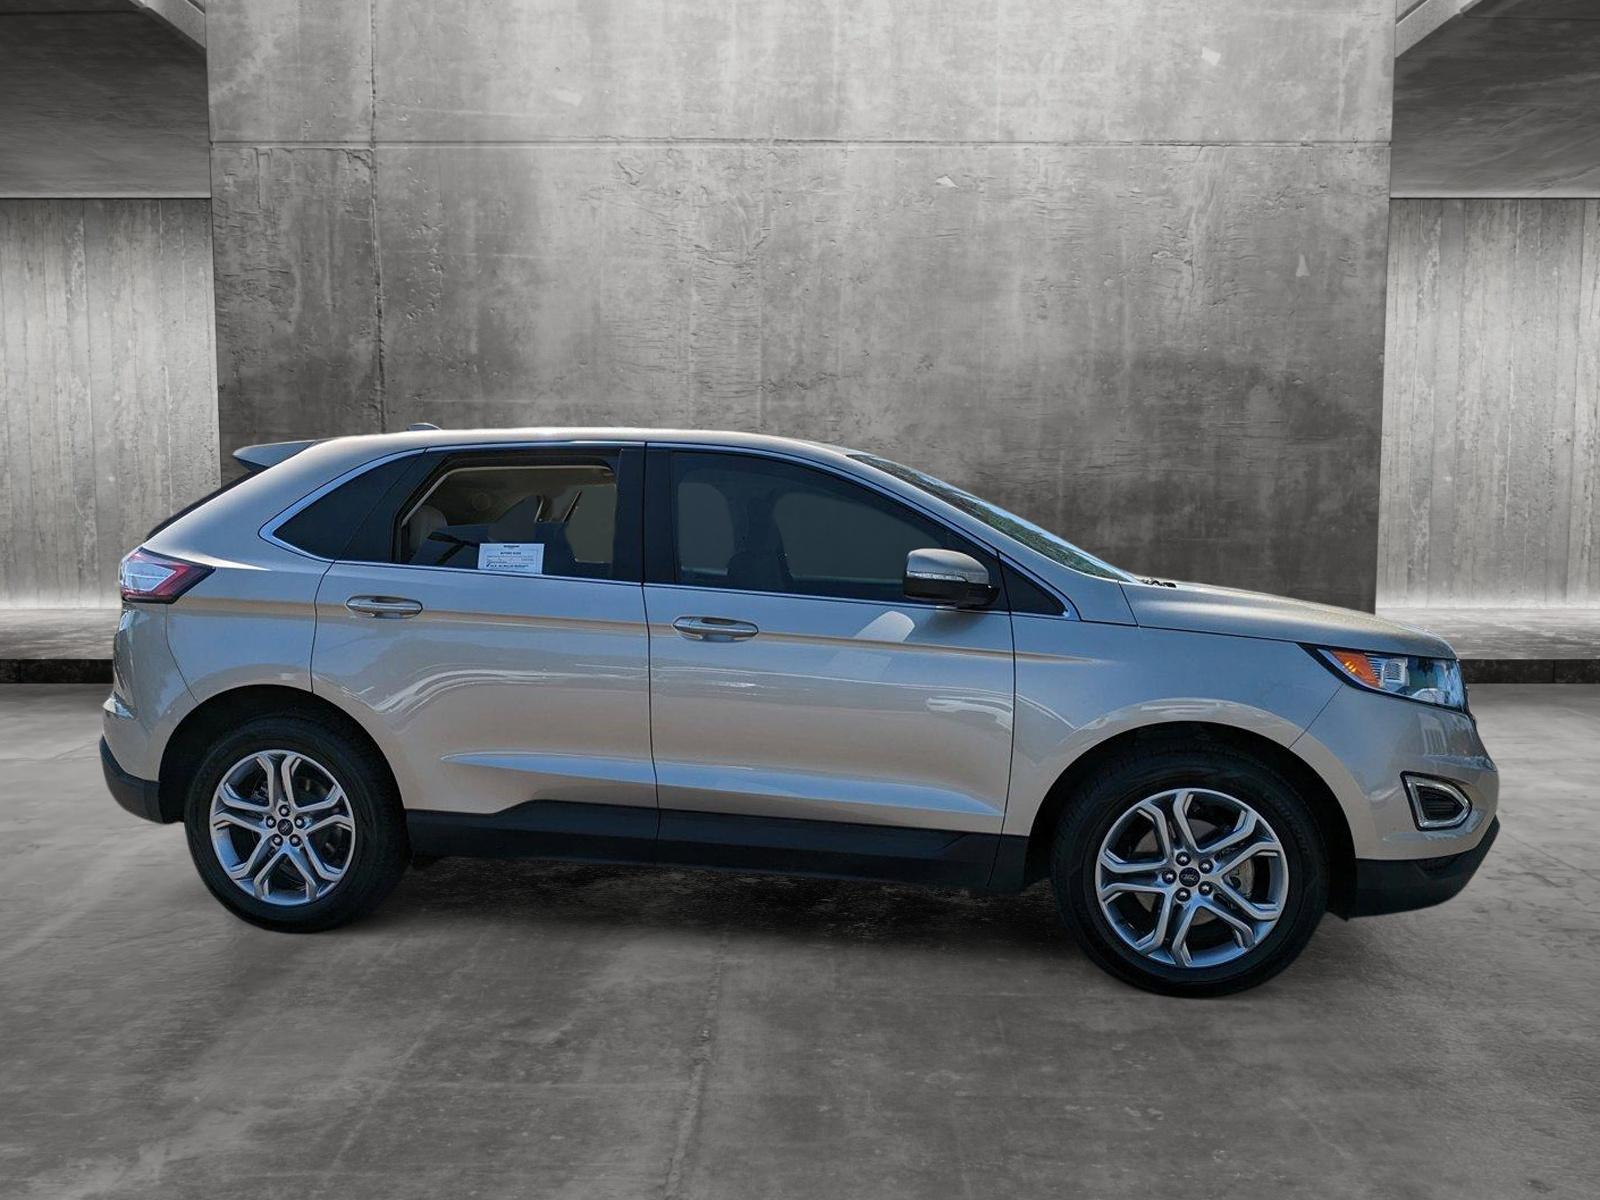 2018 Ford Edge Vehicle Photo in Jacksonville, FL 32244